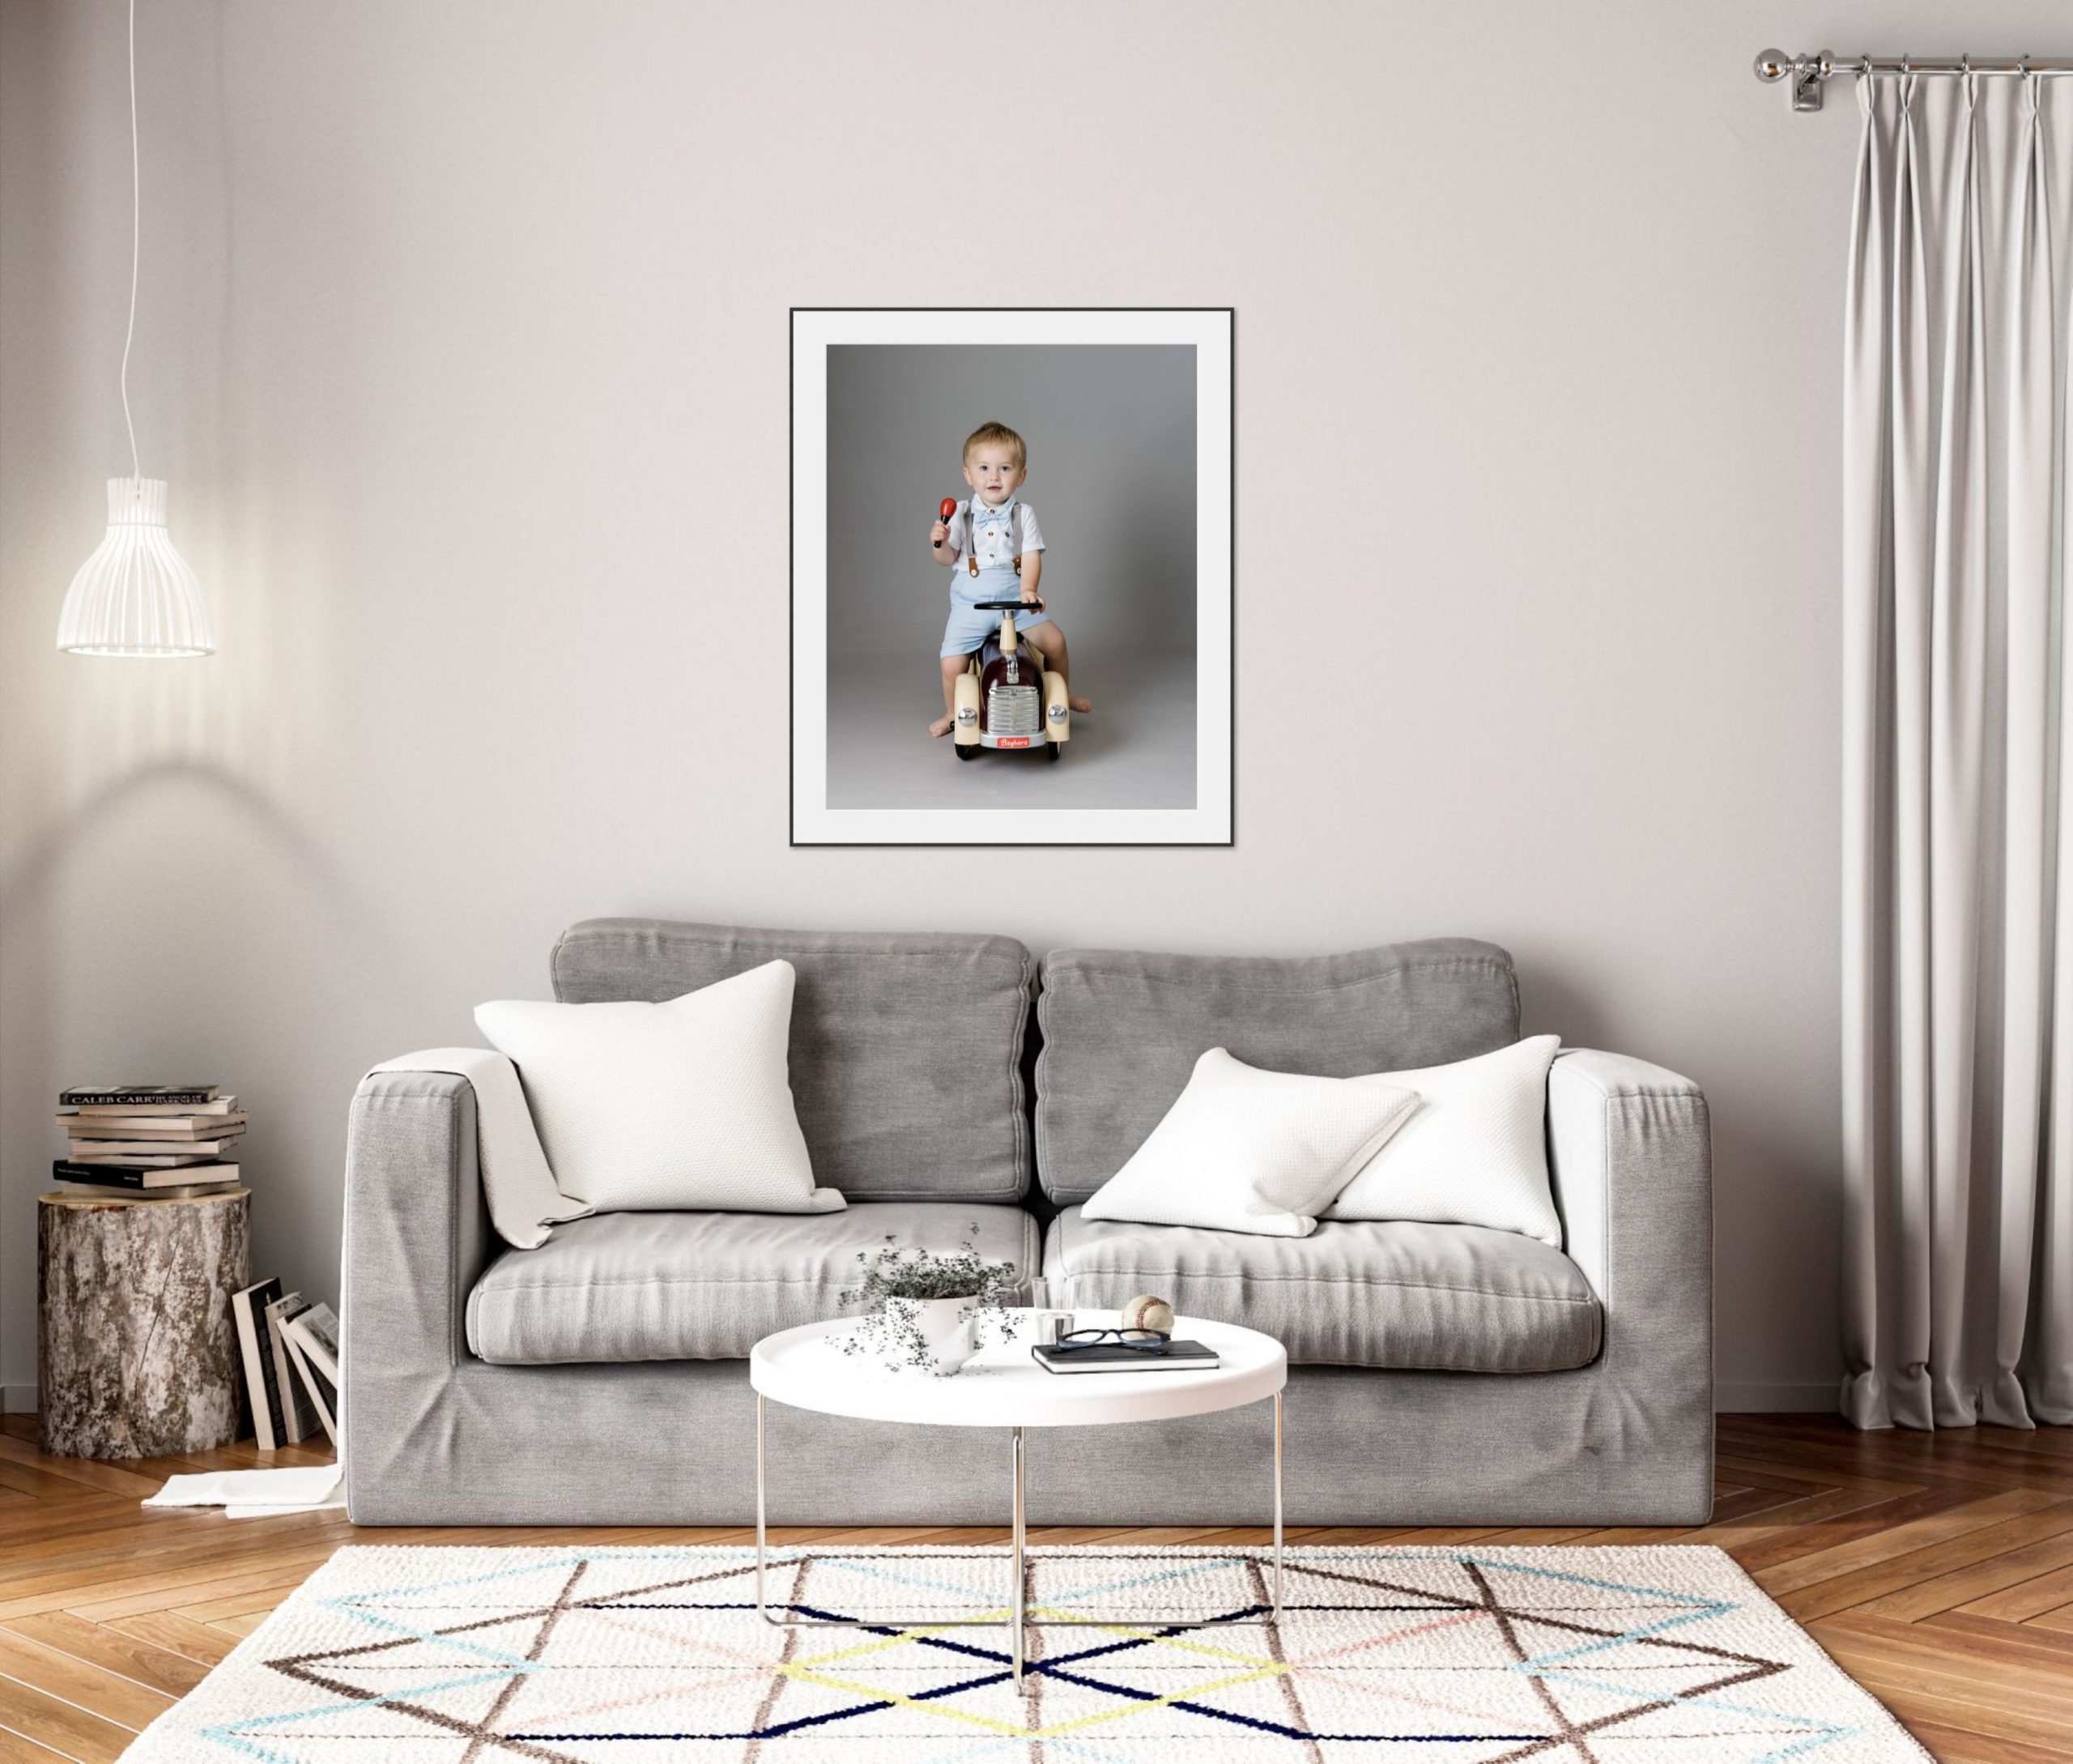 Living room scene with a grey sofa and a framed portrait photograph above the sofa.